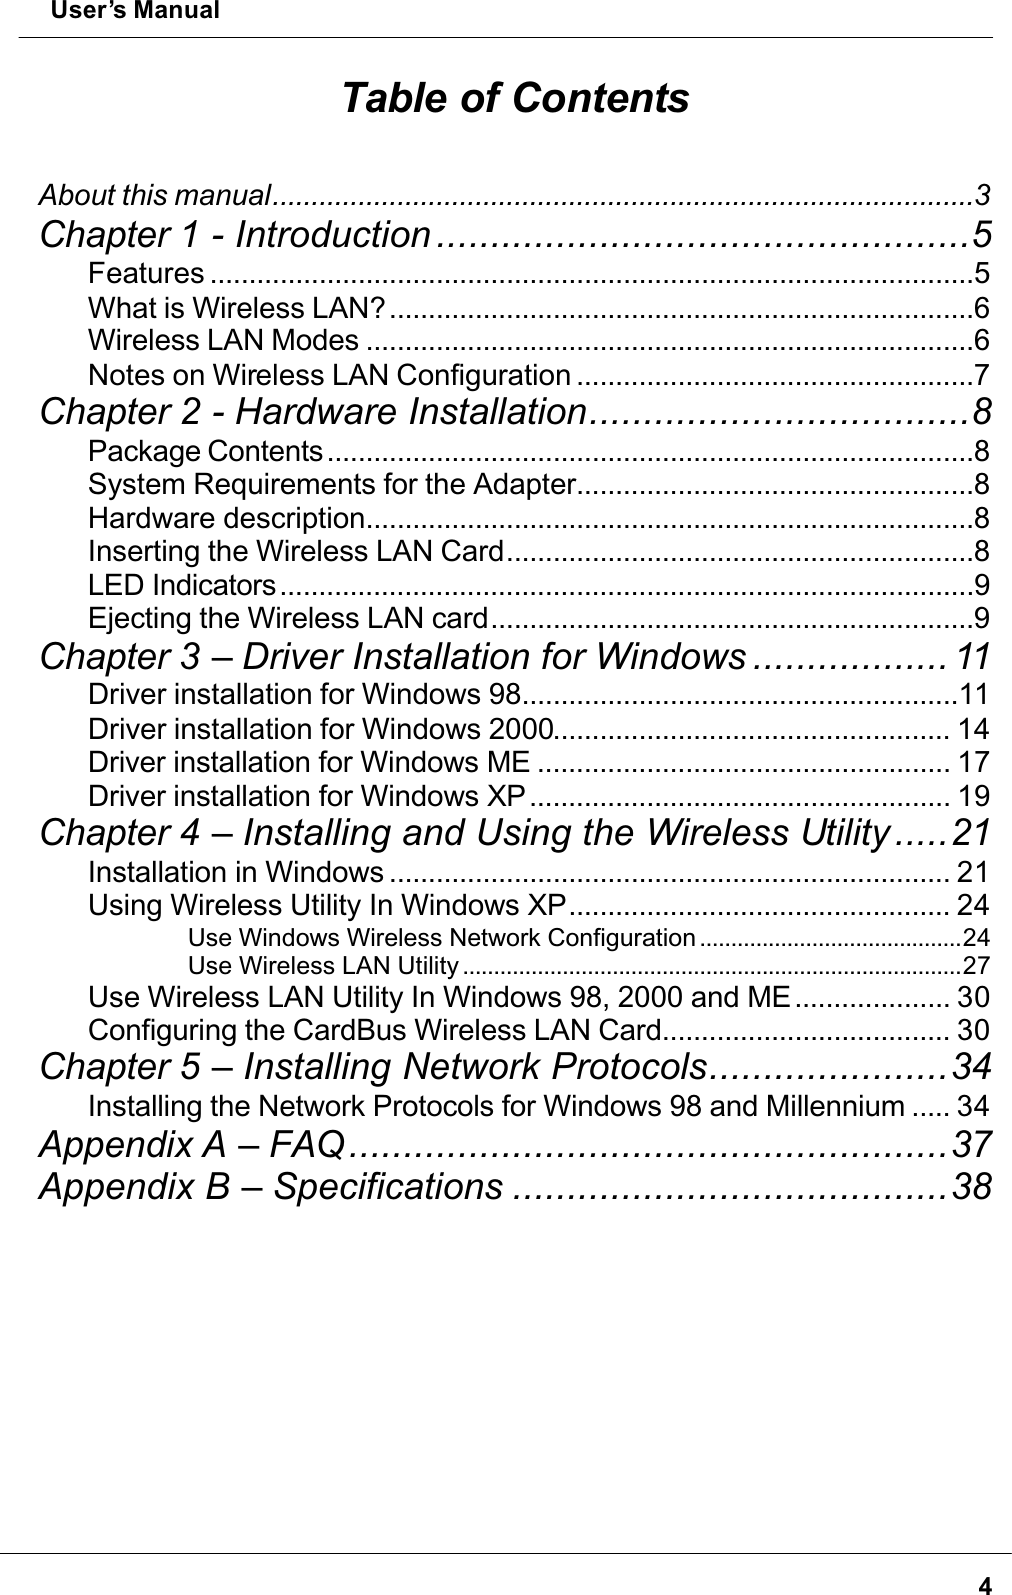  User’s Manual4Table of ContentsAbout this manual..........................................................................................3Chapter 1 - Introduction .................................................5Features ..................................................................................................5What is Wireless LAN?...........................................................................6Wireless LAN Modes ..............................................................................6Notes on Wireless LAN Configuration ...................................................7Chapter 2 - Hardware Installation...................................8Package Contents...................................................................................8System Requirements for the Adapter...................................................8Hardware description..............................................................................8Inserting the Wireless LAN Card............................................................8LED Indicators.........................................................................................9Ejecting the Wireless LAN card..............................................................9Chapter 3 – Driver Installation for Windows .................. 11Driver installation for Windows 98........................................................11Driver installation for Windows 2000................................................... 14Driver installation for Windows ME ..................................................... 17Driver installation for Windows XP...................................................... 19Chapter 4 – Installing and Using the Wireless Utility.....21Installation in Windows ........................................................................ 21Using Wireless Utility In Windows XP................................................. 24Use Windows Wireless Network Configuration ..........................................24Use Wireless LAN Utility ................................................................................27Use Wireless LAN Utility In Windows 98, 2000 and ME.................... 30Configuring the CardBus Wireless LAN Card..................................... 30Chapter 5 – Installing Network Protocols......................34Installing the Network Protocols for Windows 98 and Millennium ..... 34Appendix A – FAQ .......................................................37Appendix B – Specifications ........................................38